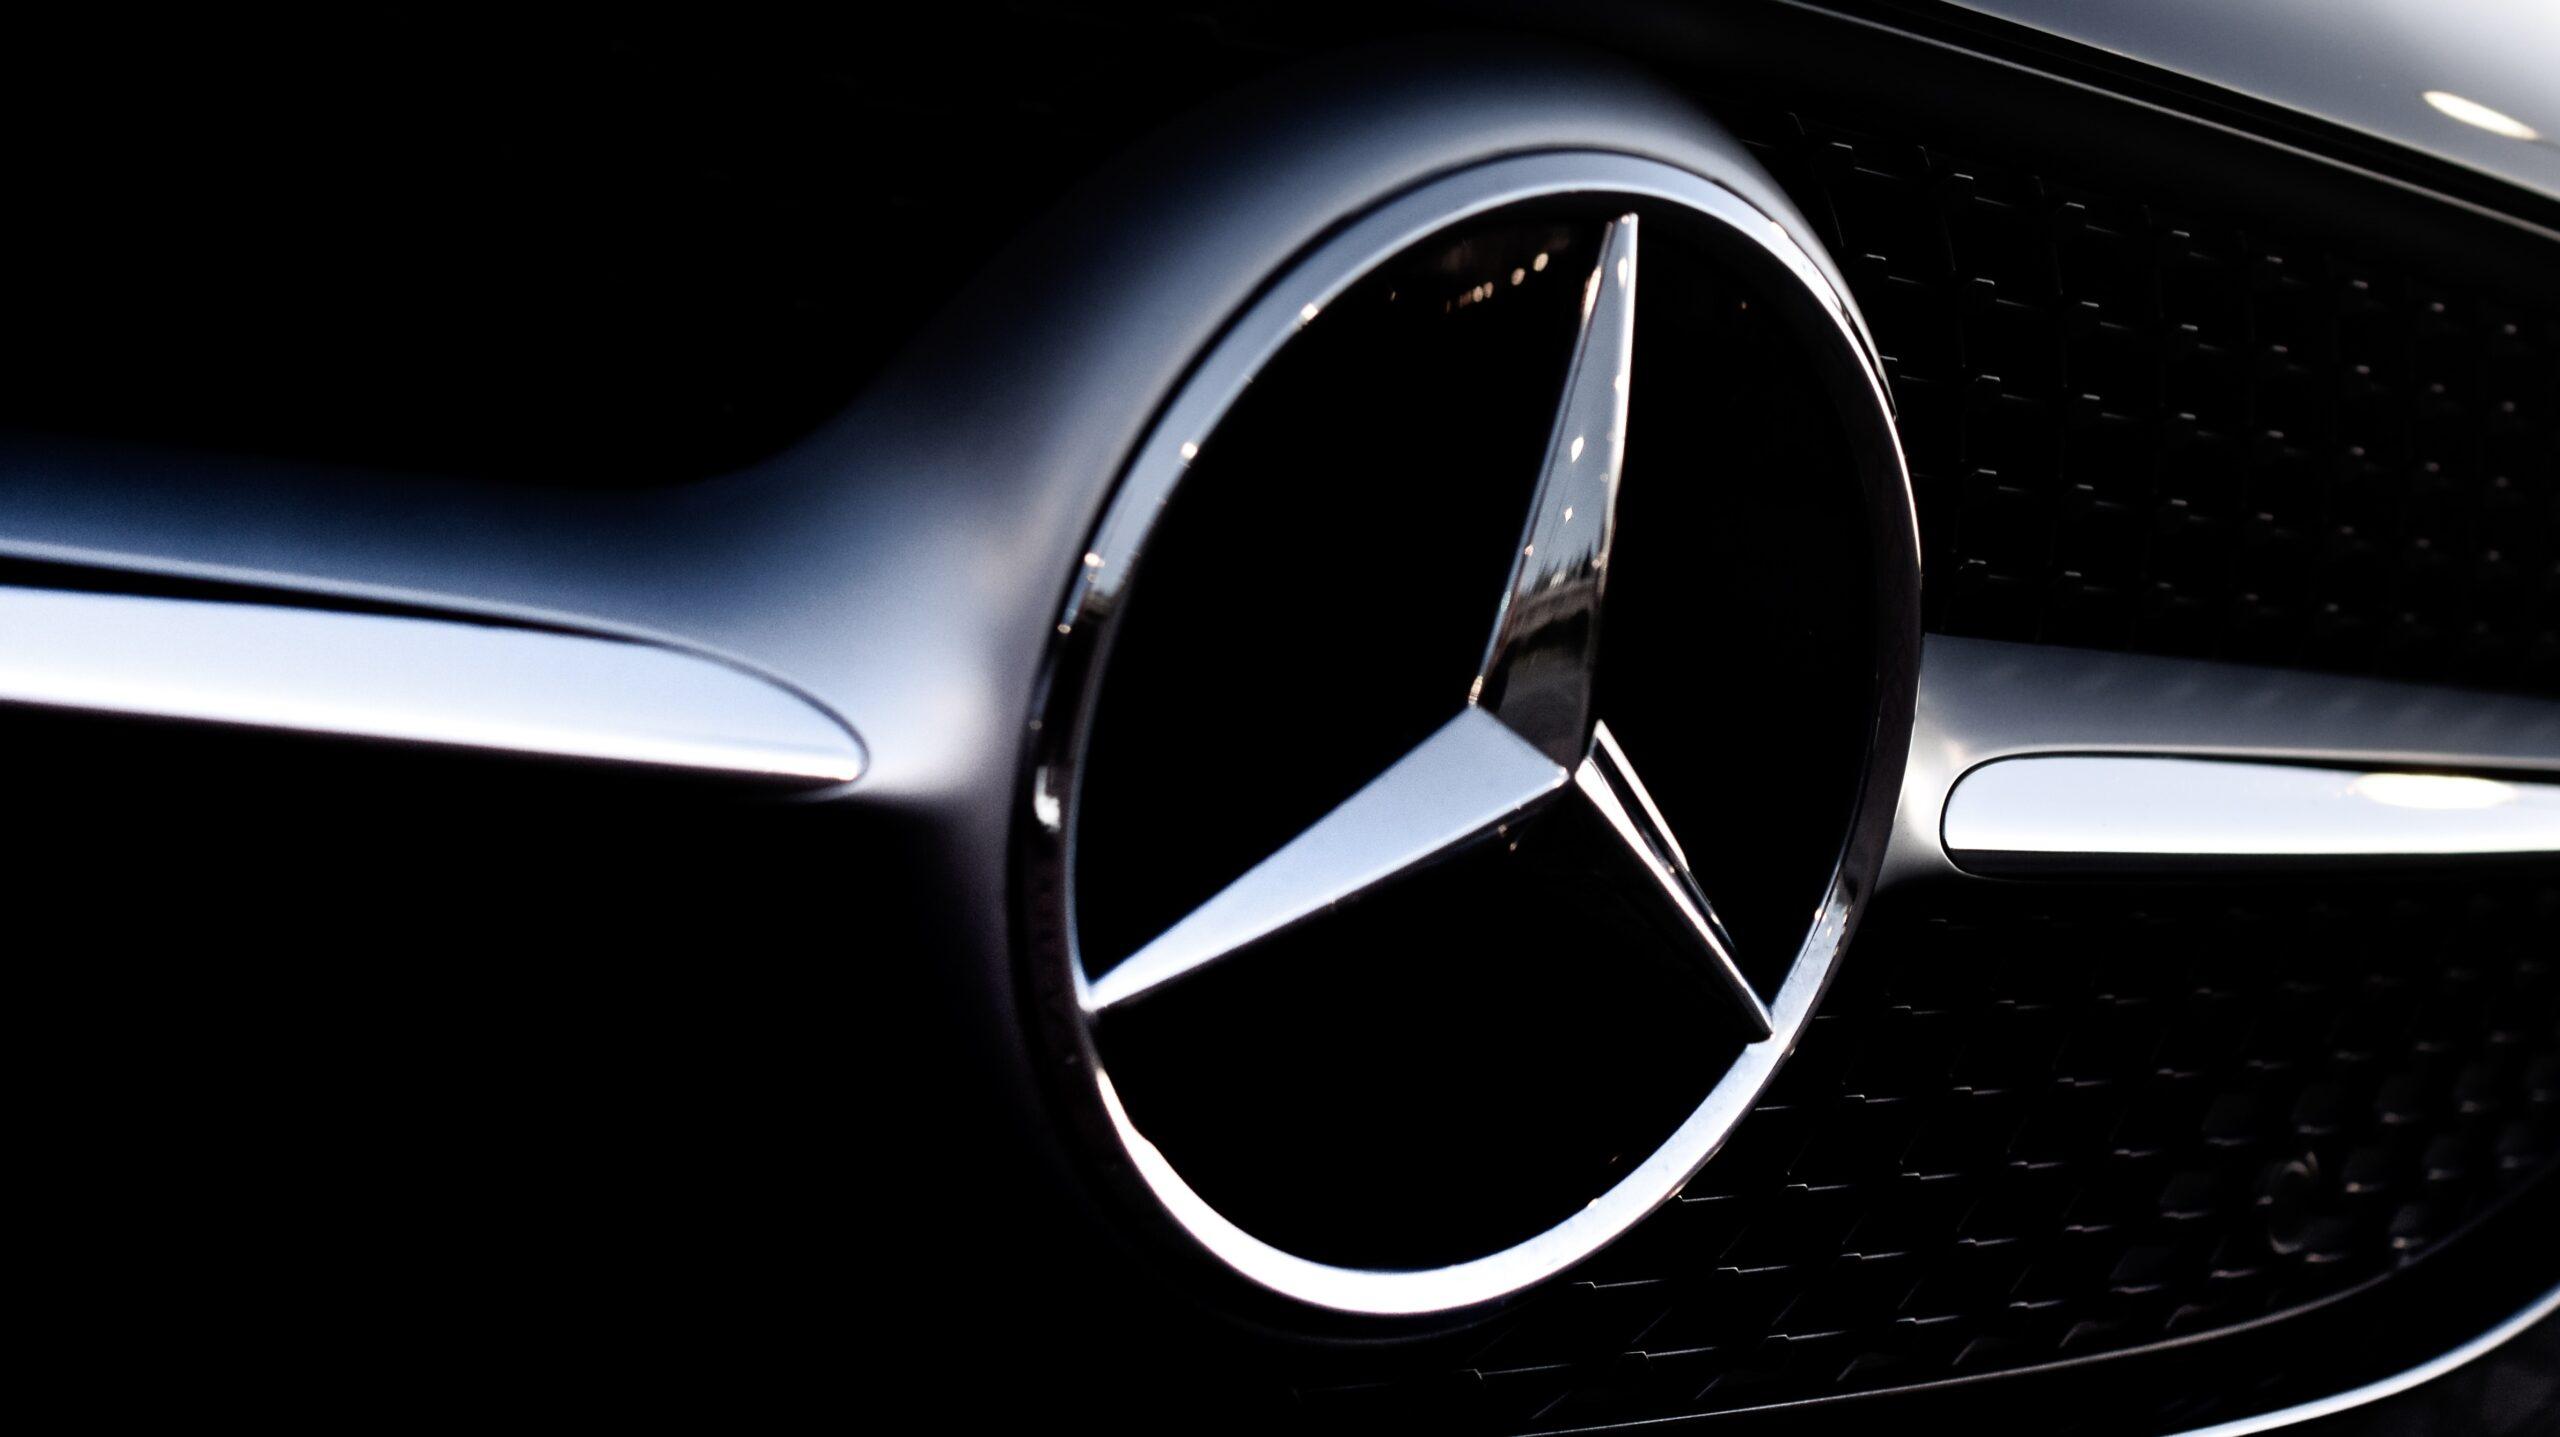 Close up of the logo on a Mercedes Benz car.